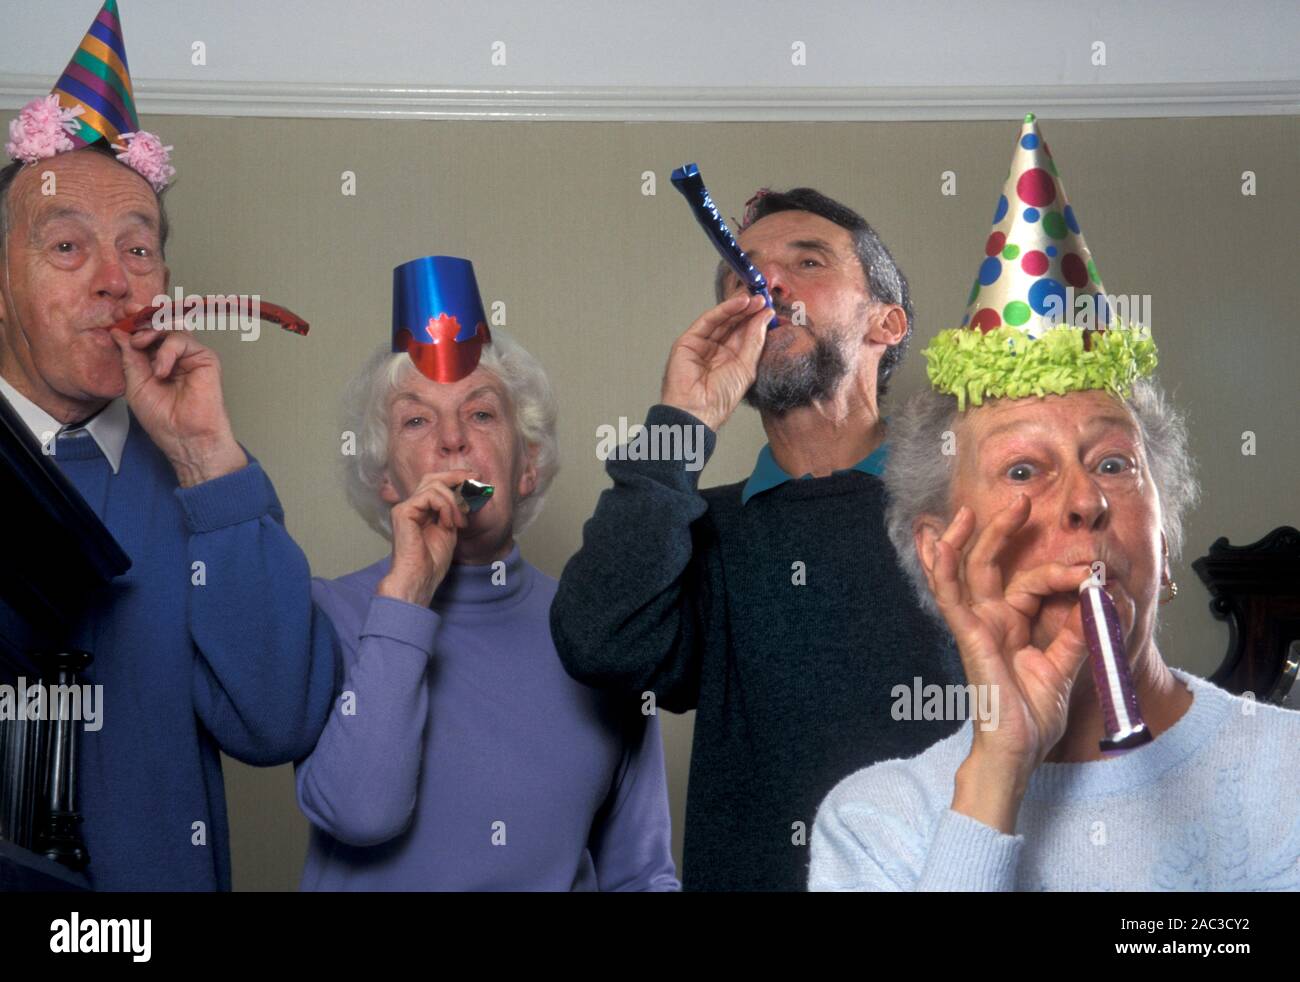 Spirited seniors at a Christmas party blowing party blowers Stock Photo